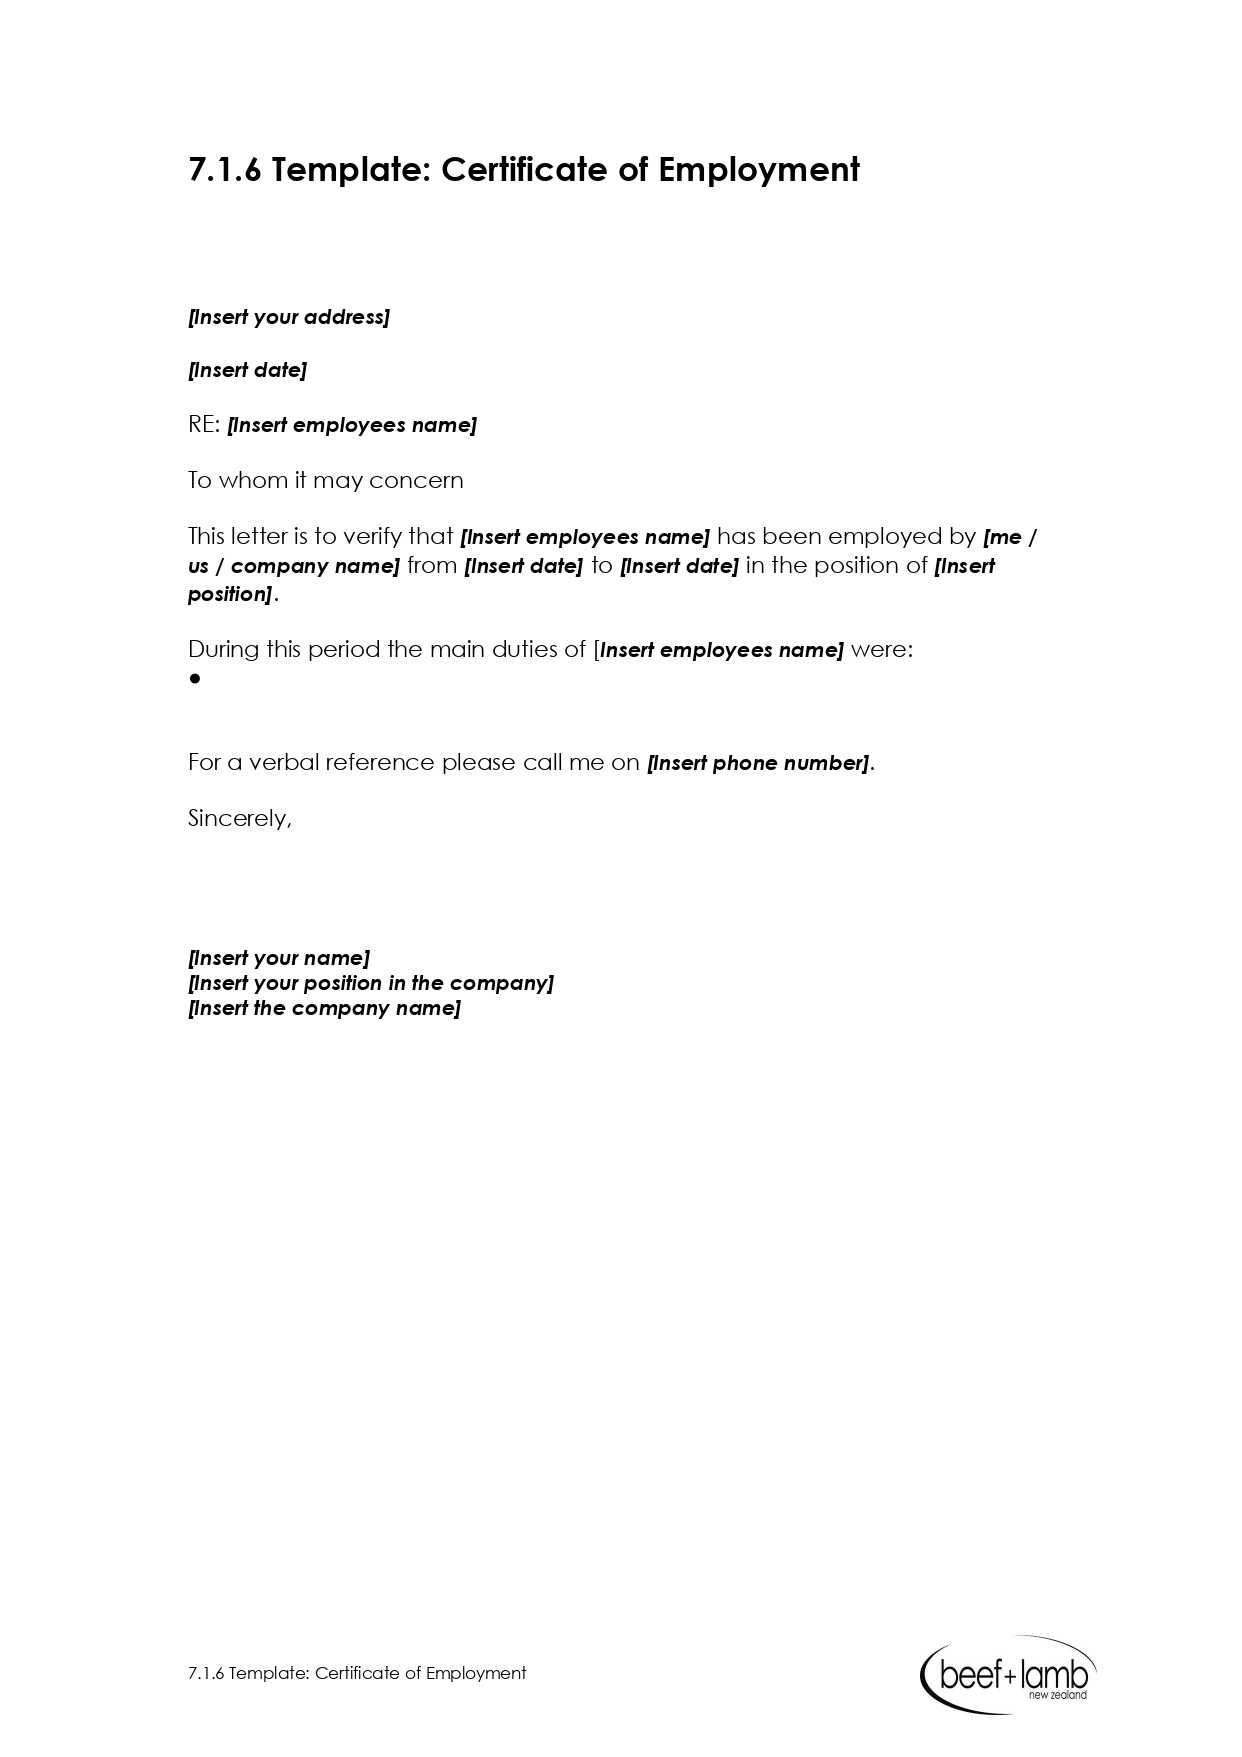 Editable Certificate Of Employment Template – Google Docs Regarding Template Of Certificate Of Employment